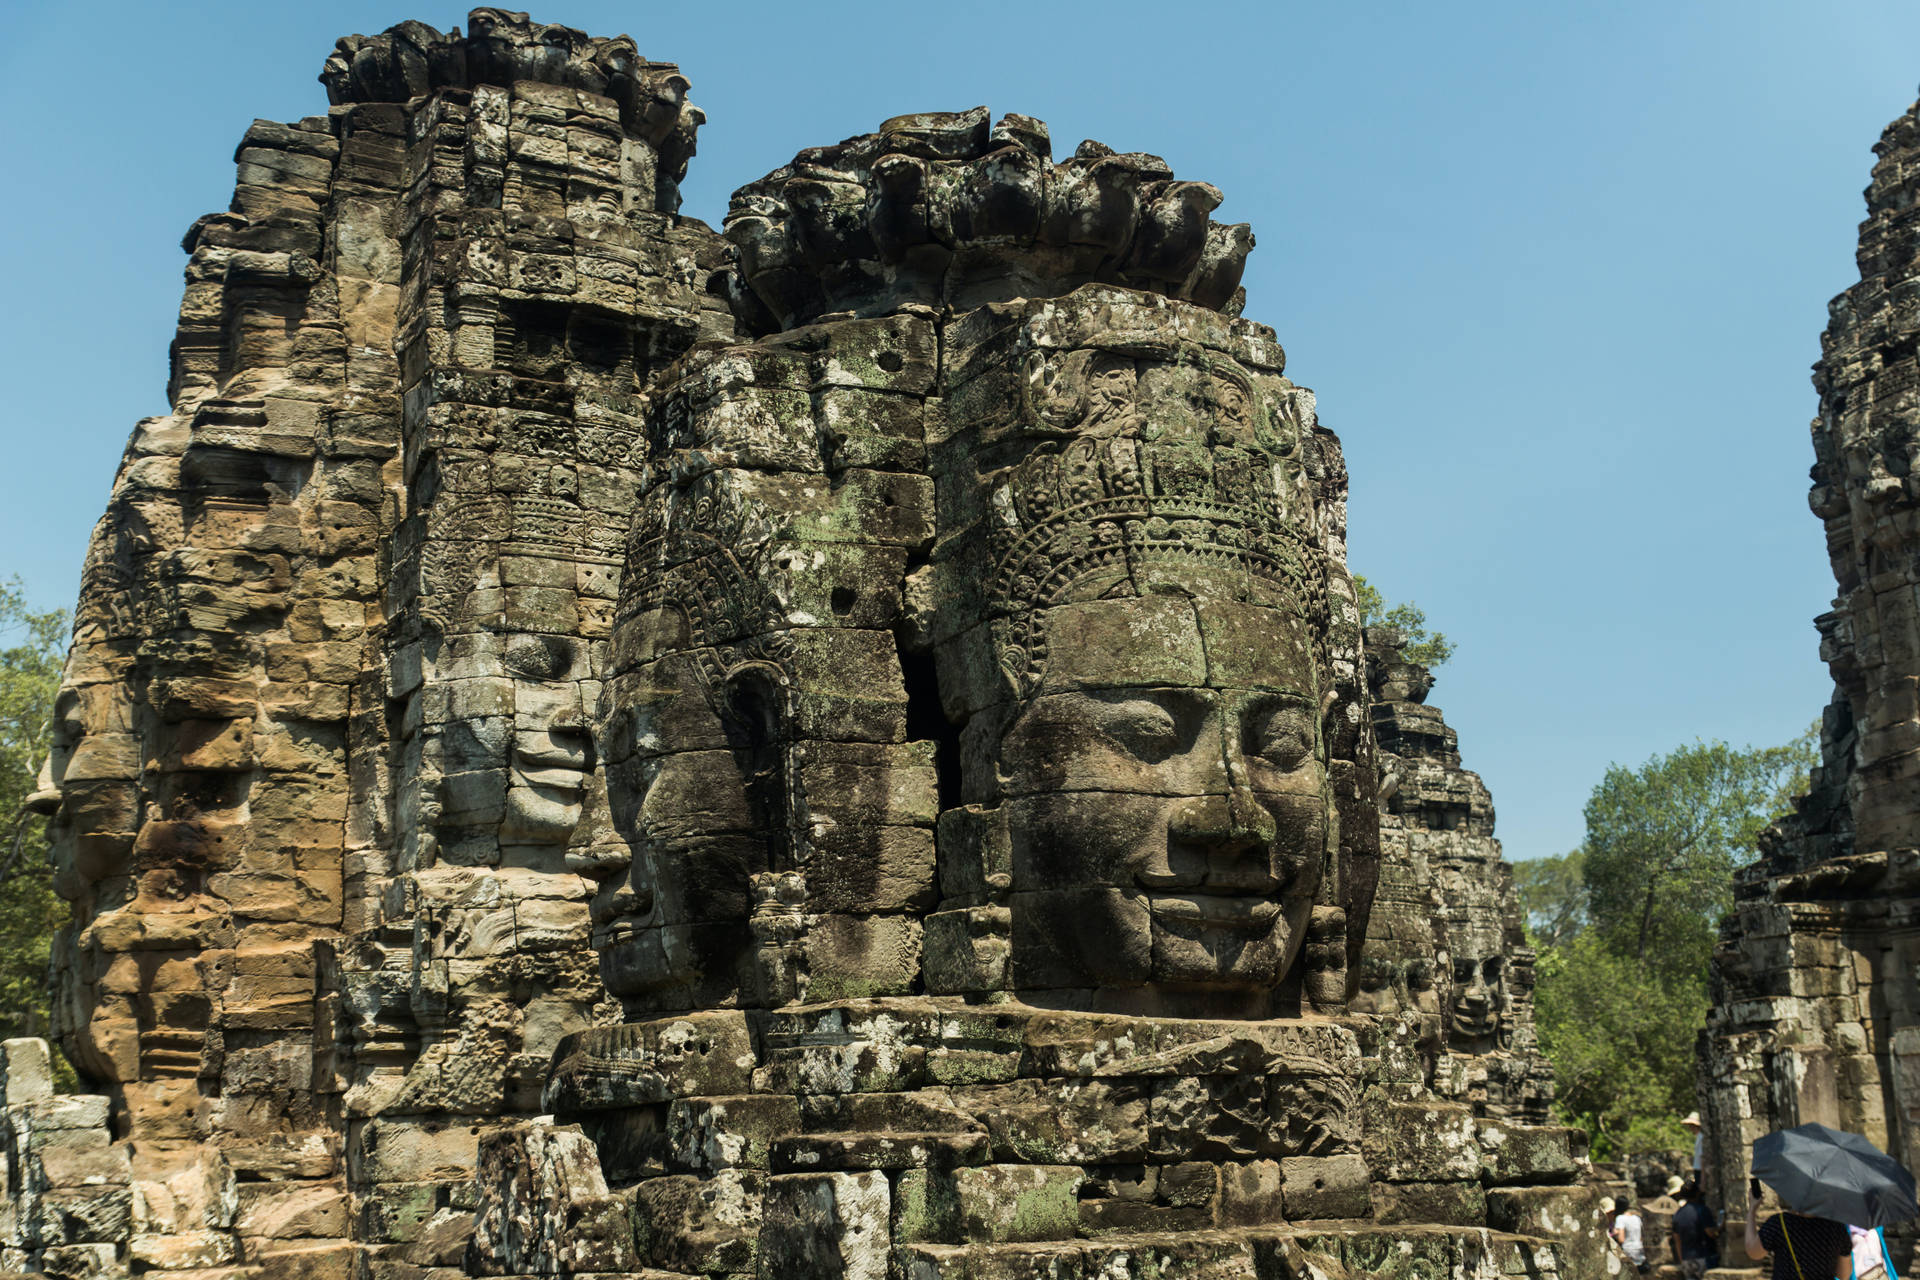 Caption: Majestic Stone Faces In Angkor Wat, Cambodia Background